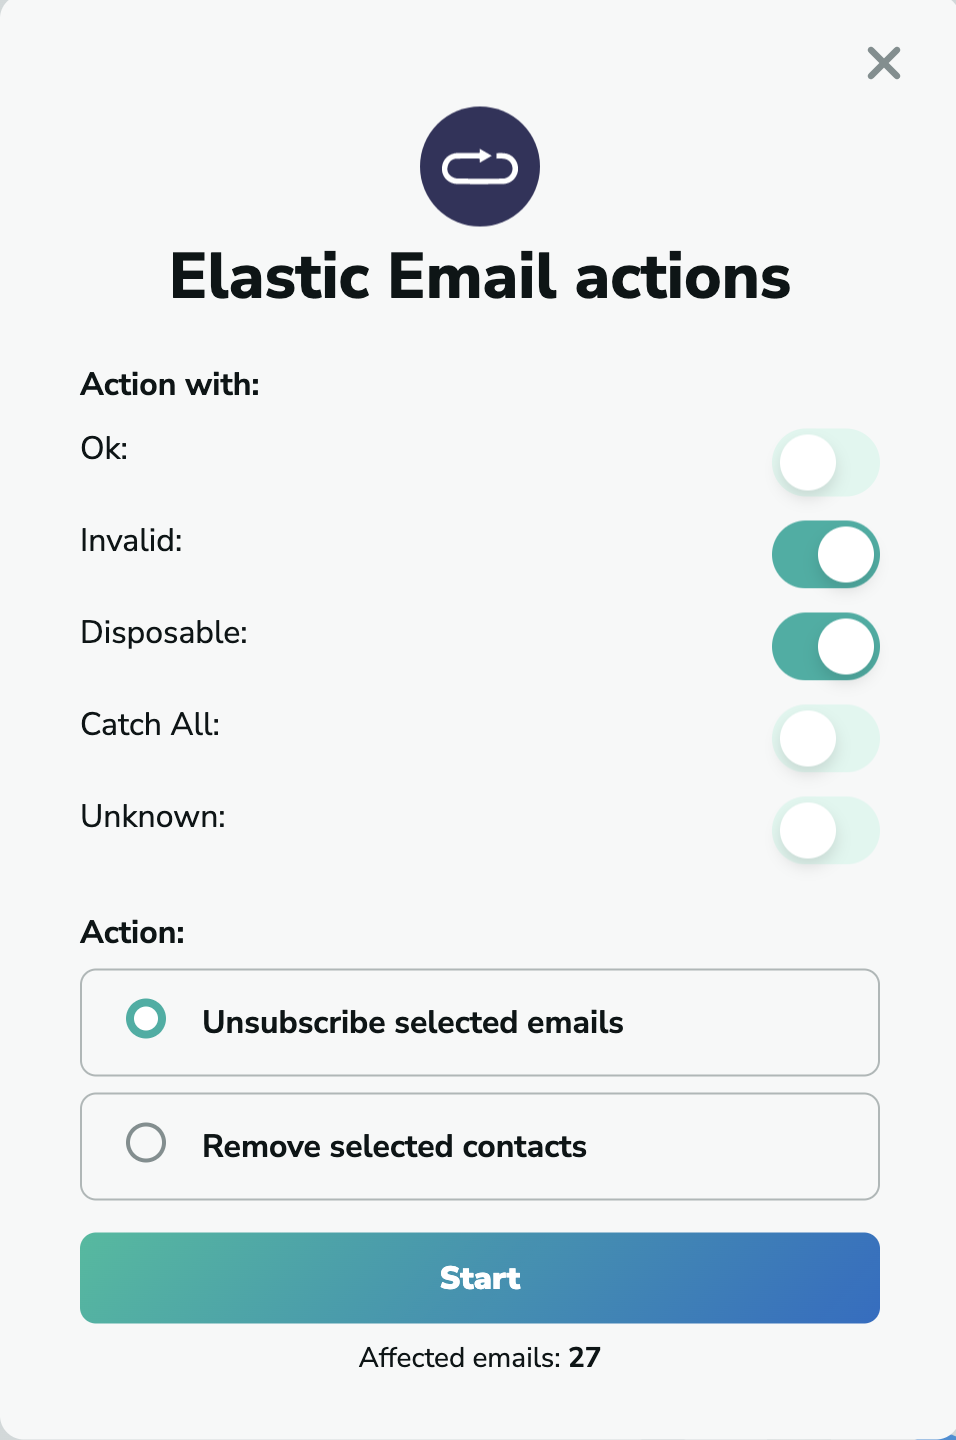 Elastic Email unsubscribe emails in MillionVerifier